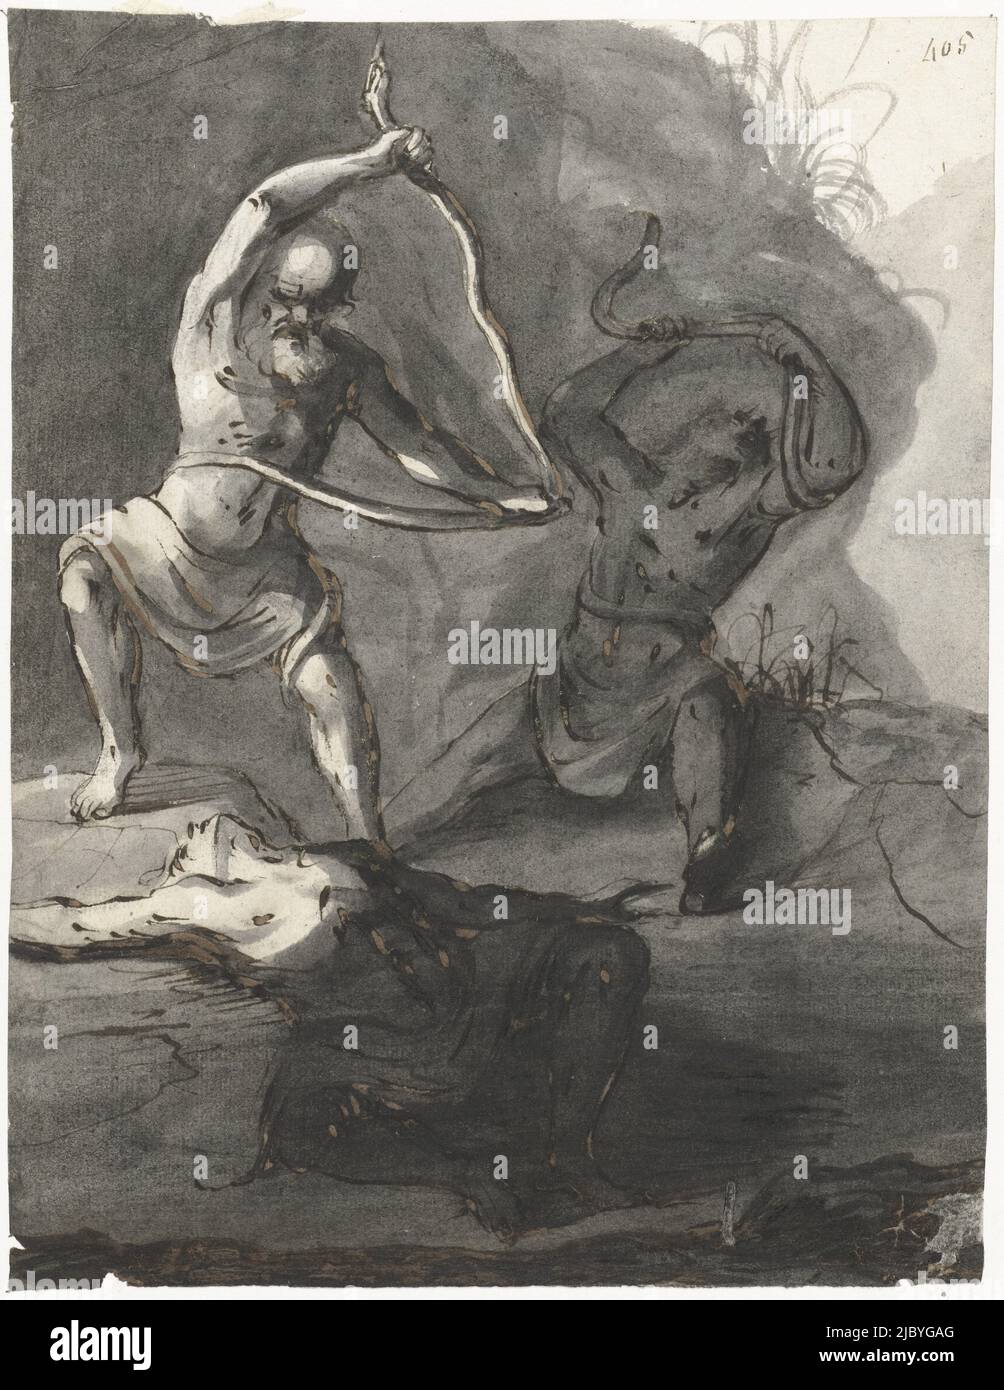 Laocoön and his sons (?), Moses ter Borch, c. 1661 - c. 1662, draughtsman: Moses ter Borch, Zwolle, c. 1661 - c. 1662, paper, brush, h 210 mm × w 161 mm Stock Photo